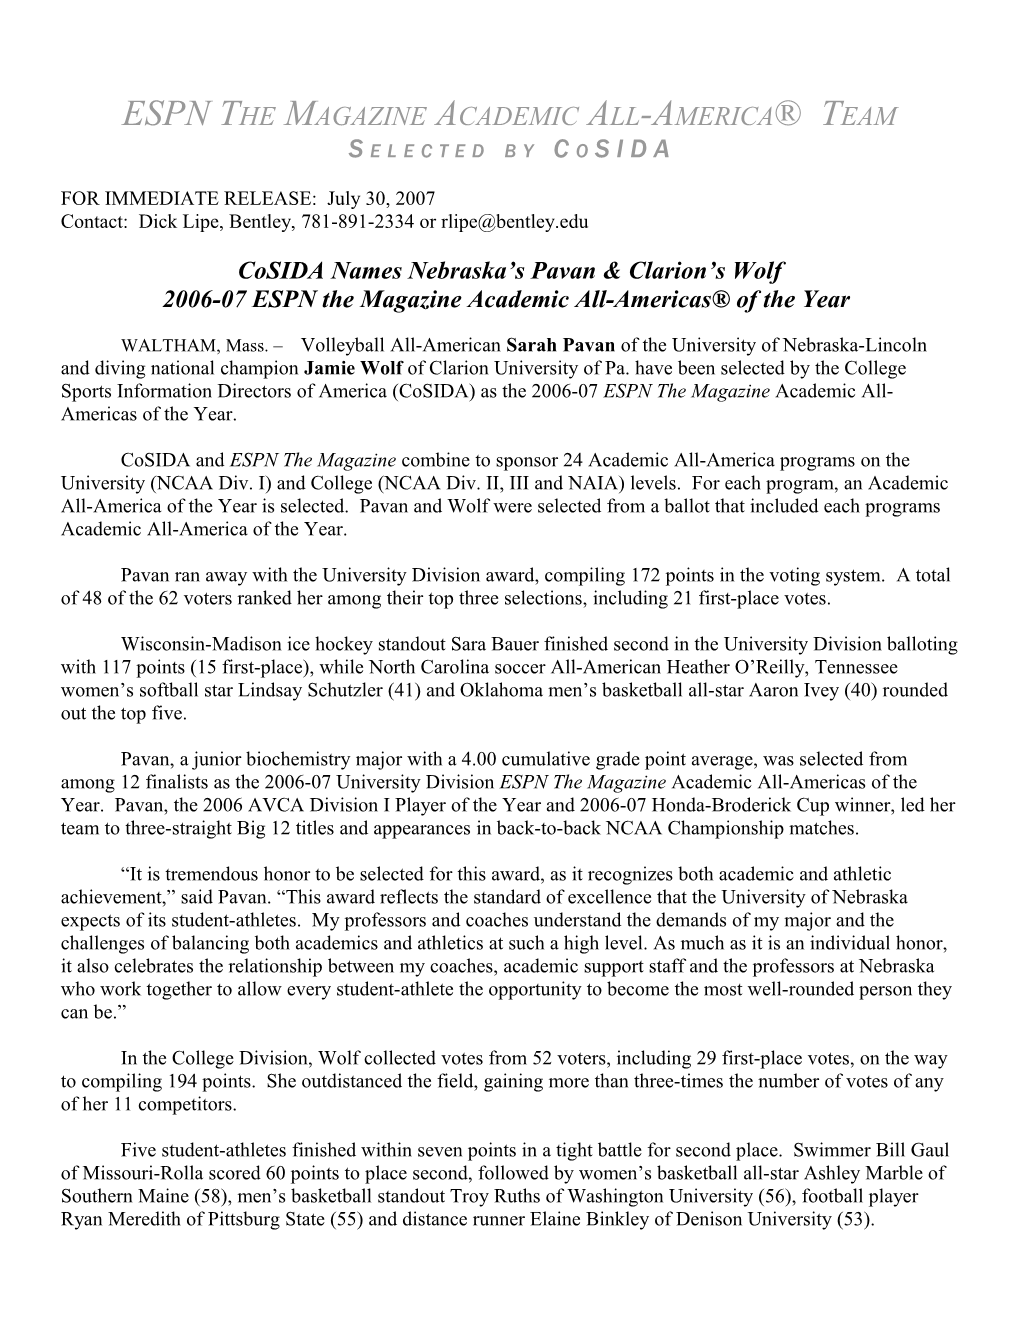 FOR IMMEDIATE RELEASE: Tuesday, June 1, 2004